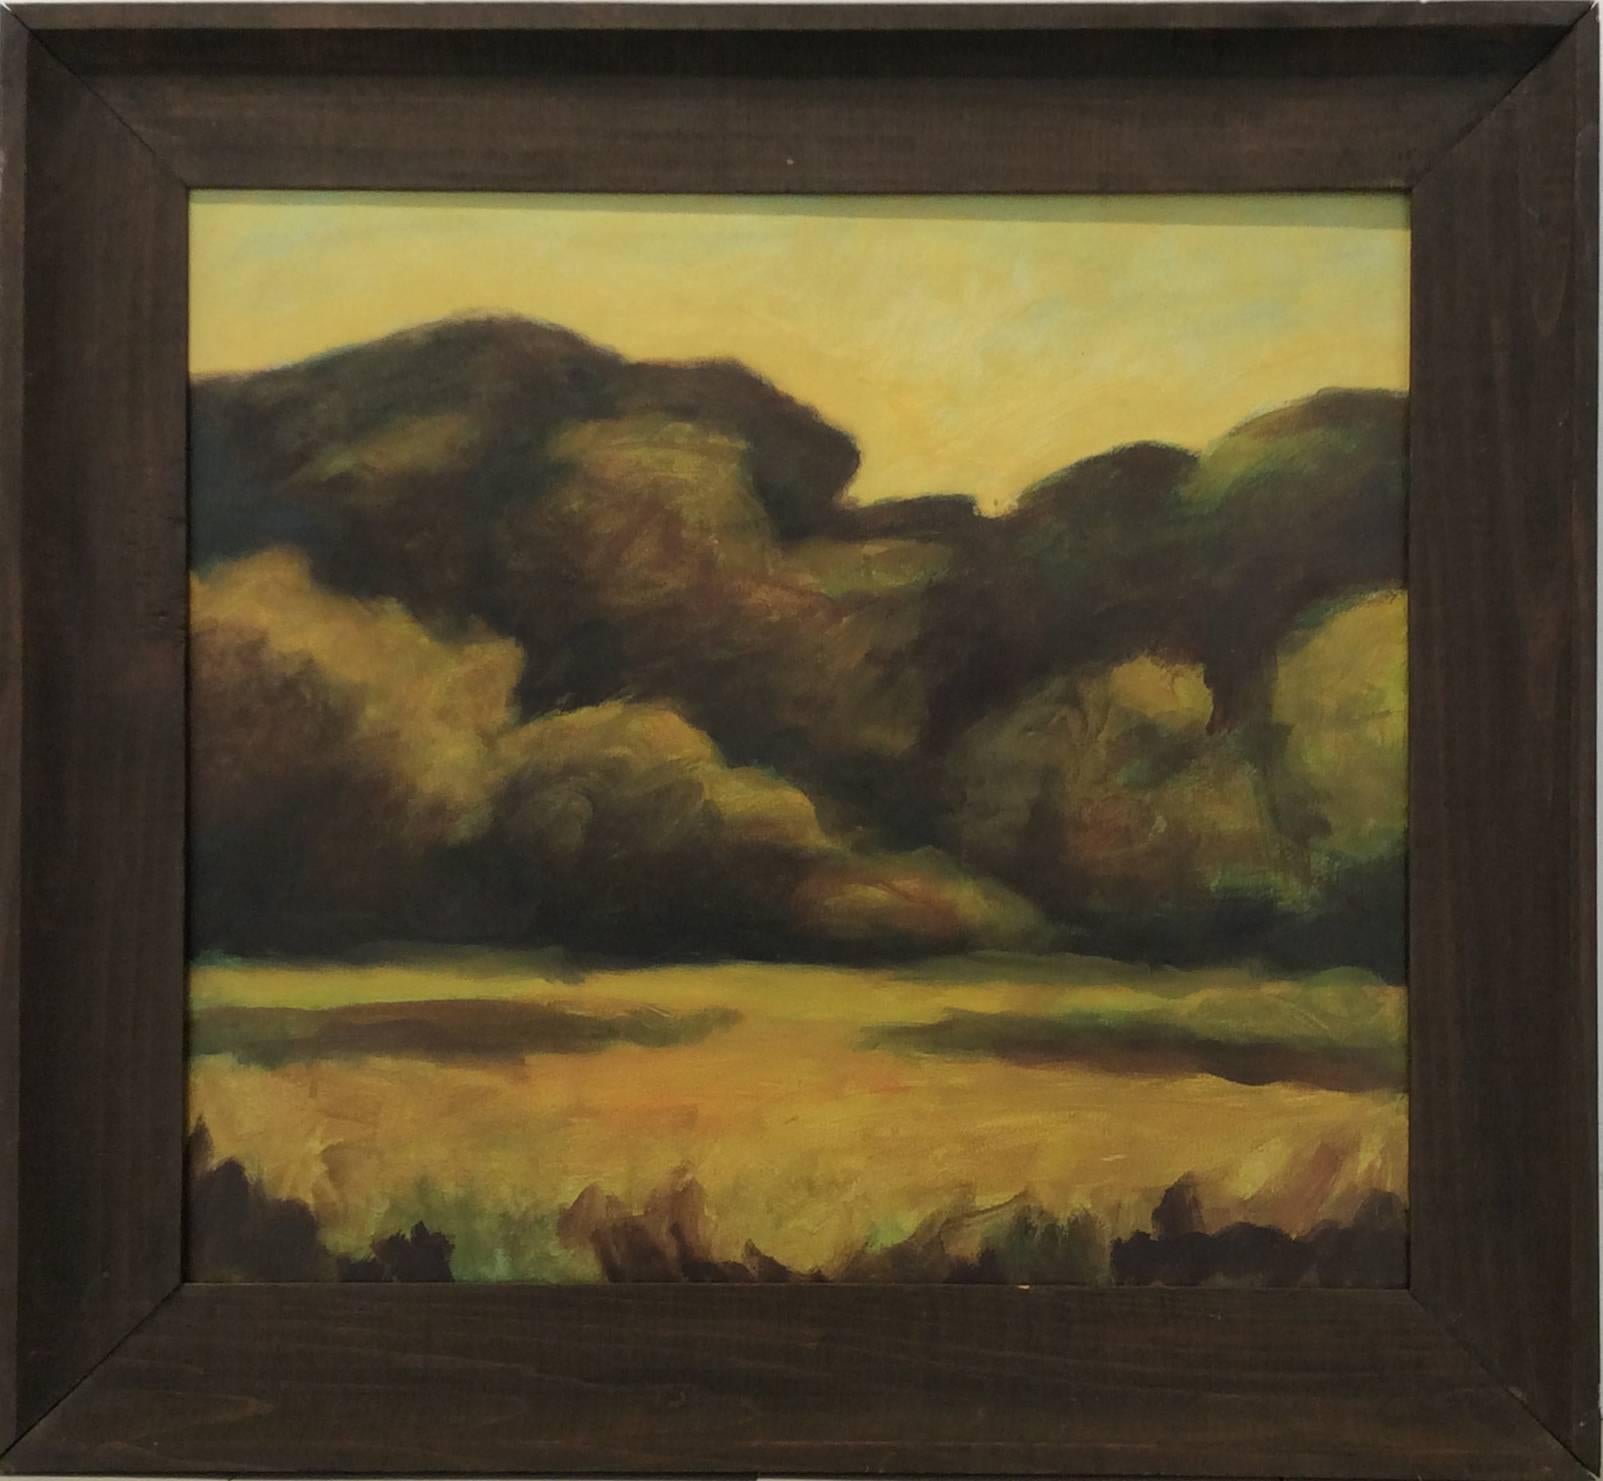 15.5 x 17 inches, oil on panel
20 x 22 x 1 inches framed, brown wood molding

Painted in a realist style that evokes the works of Andrew Wyeth and Edward Hopper, this is a painting of an American rural landscape set in a vast field that is bordered